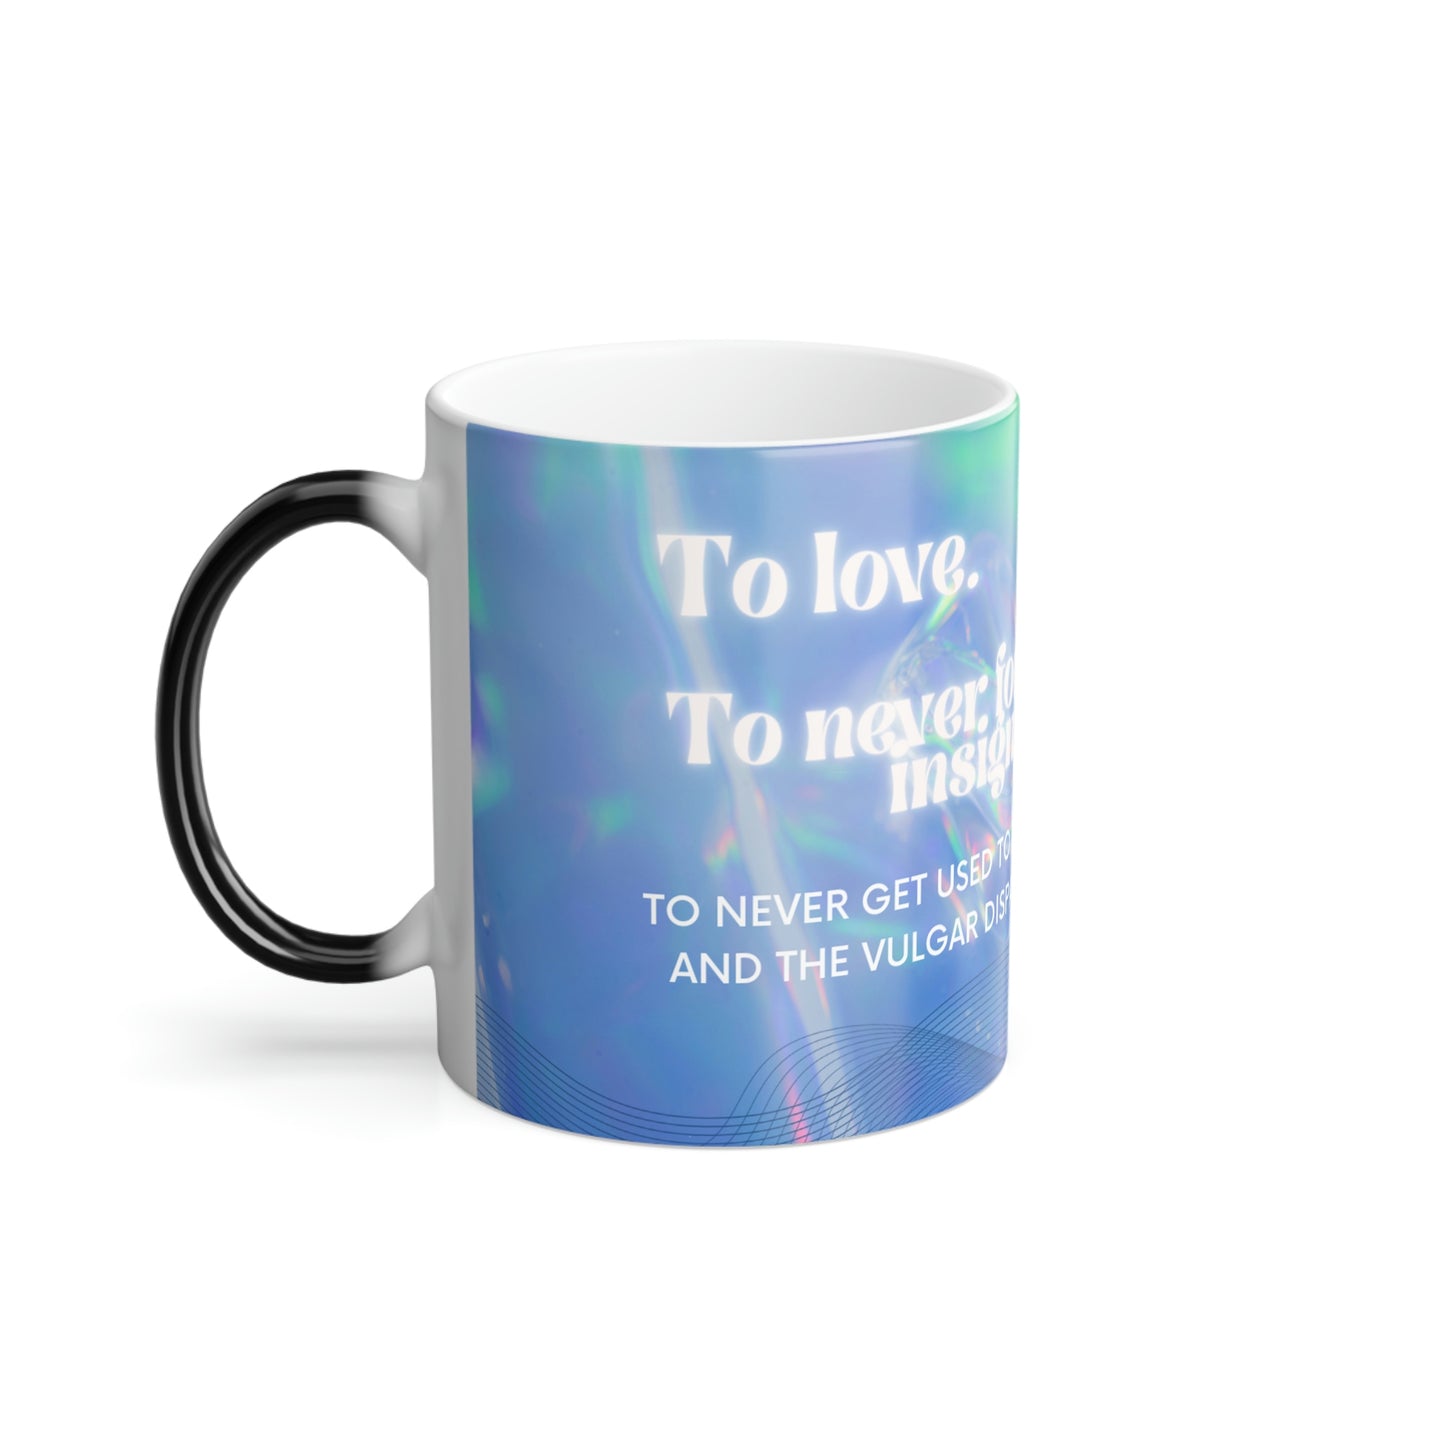 Life's Paradoxes, Color Morphing Mug, 11oz